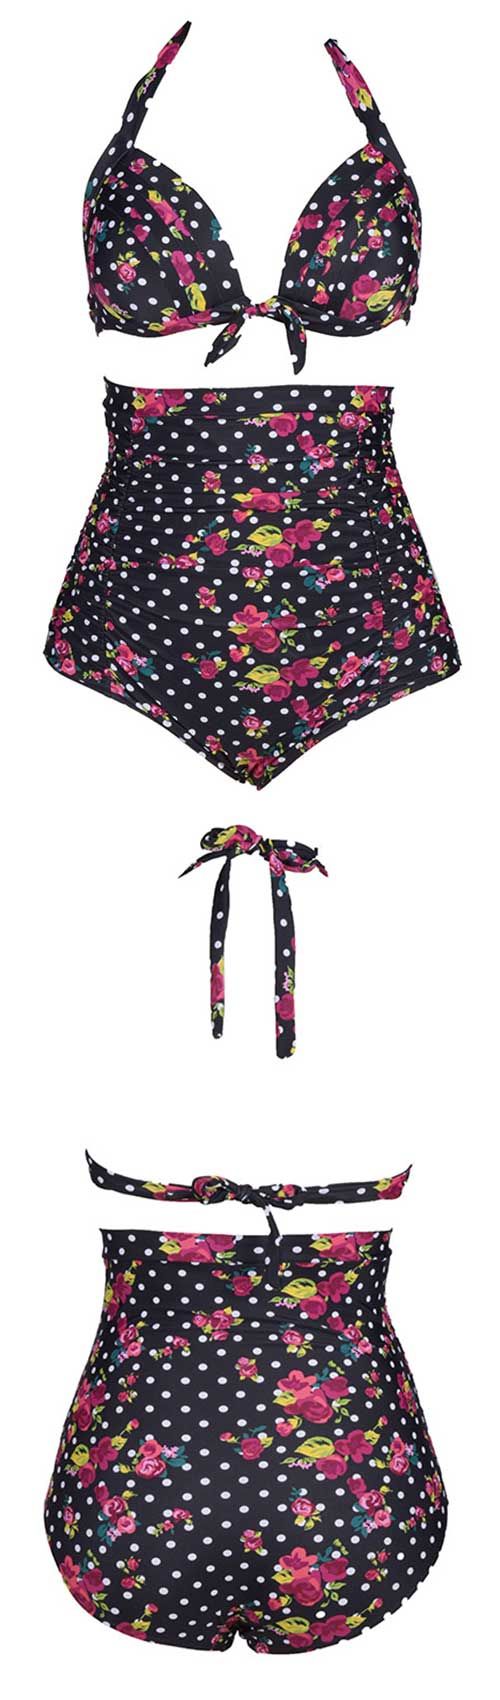 There are a lot of swimwears with floral accent. The halter bikini set detailed with Roses printing and Hi